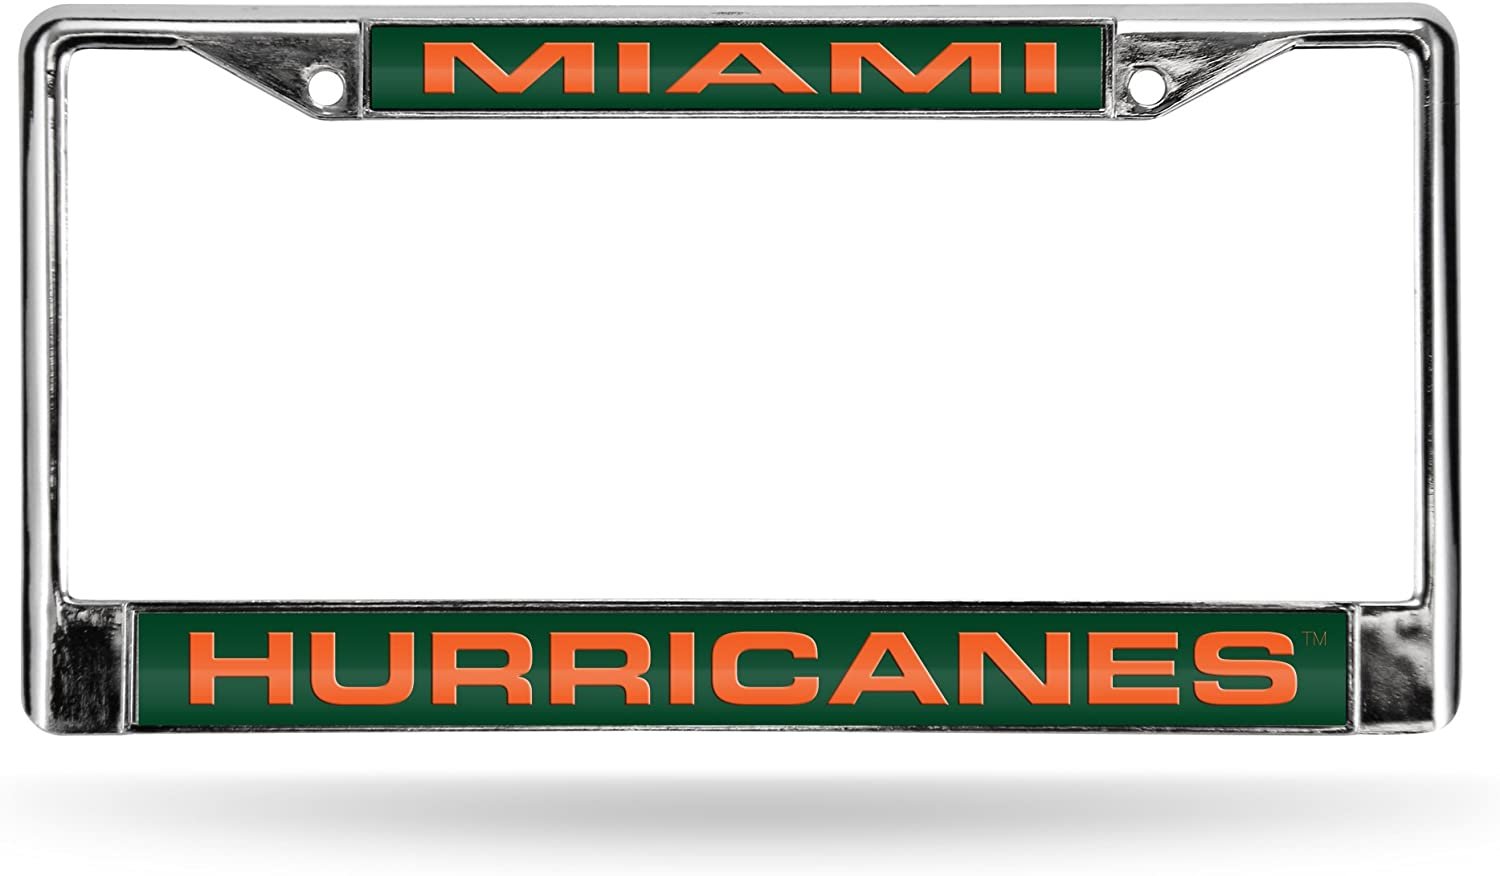 University of Miami Hurricanes Metal License Plate Frame Chrome Tag Cover, Laser Acrylic Mirrored Inserts, 12x6 Inch